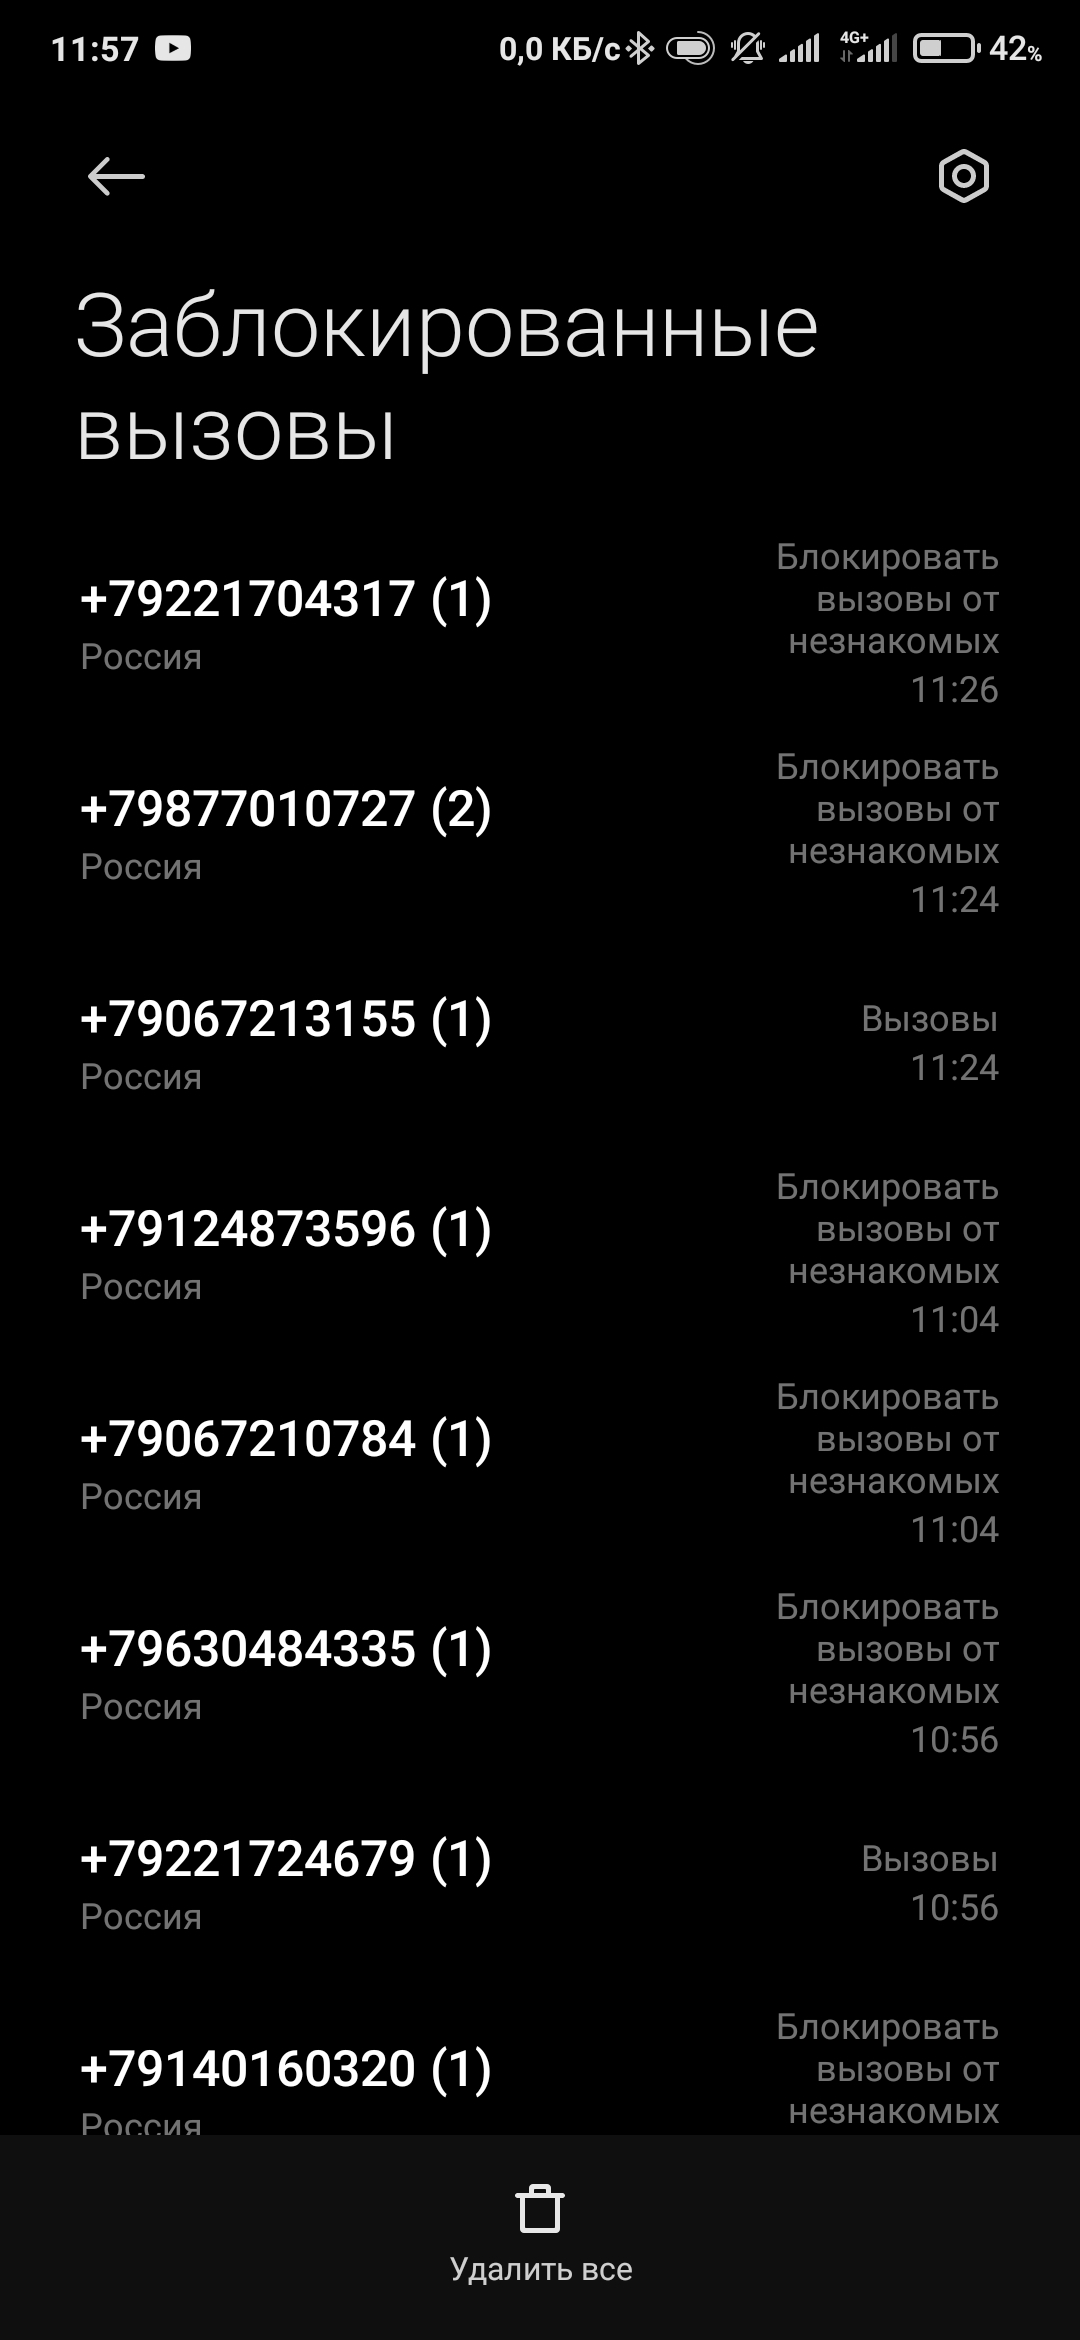 Good morning, 20 spam calls to your collar - My, Infuriates, Indignation, Tired of, Bank, Spam, Spam calls, Sovcombank, Halva Map, Morning in a pine forest, Morning is never good, Mat, Cry from the heart, Crying Yaroslavna, Нытье, Longpost, Negative